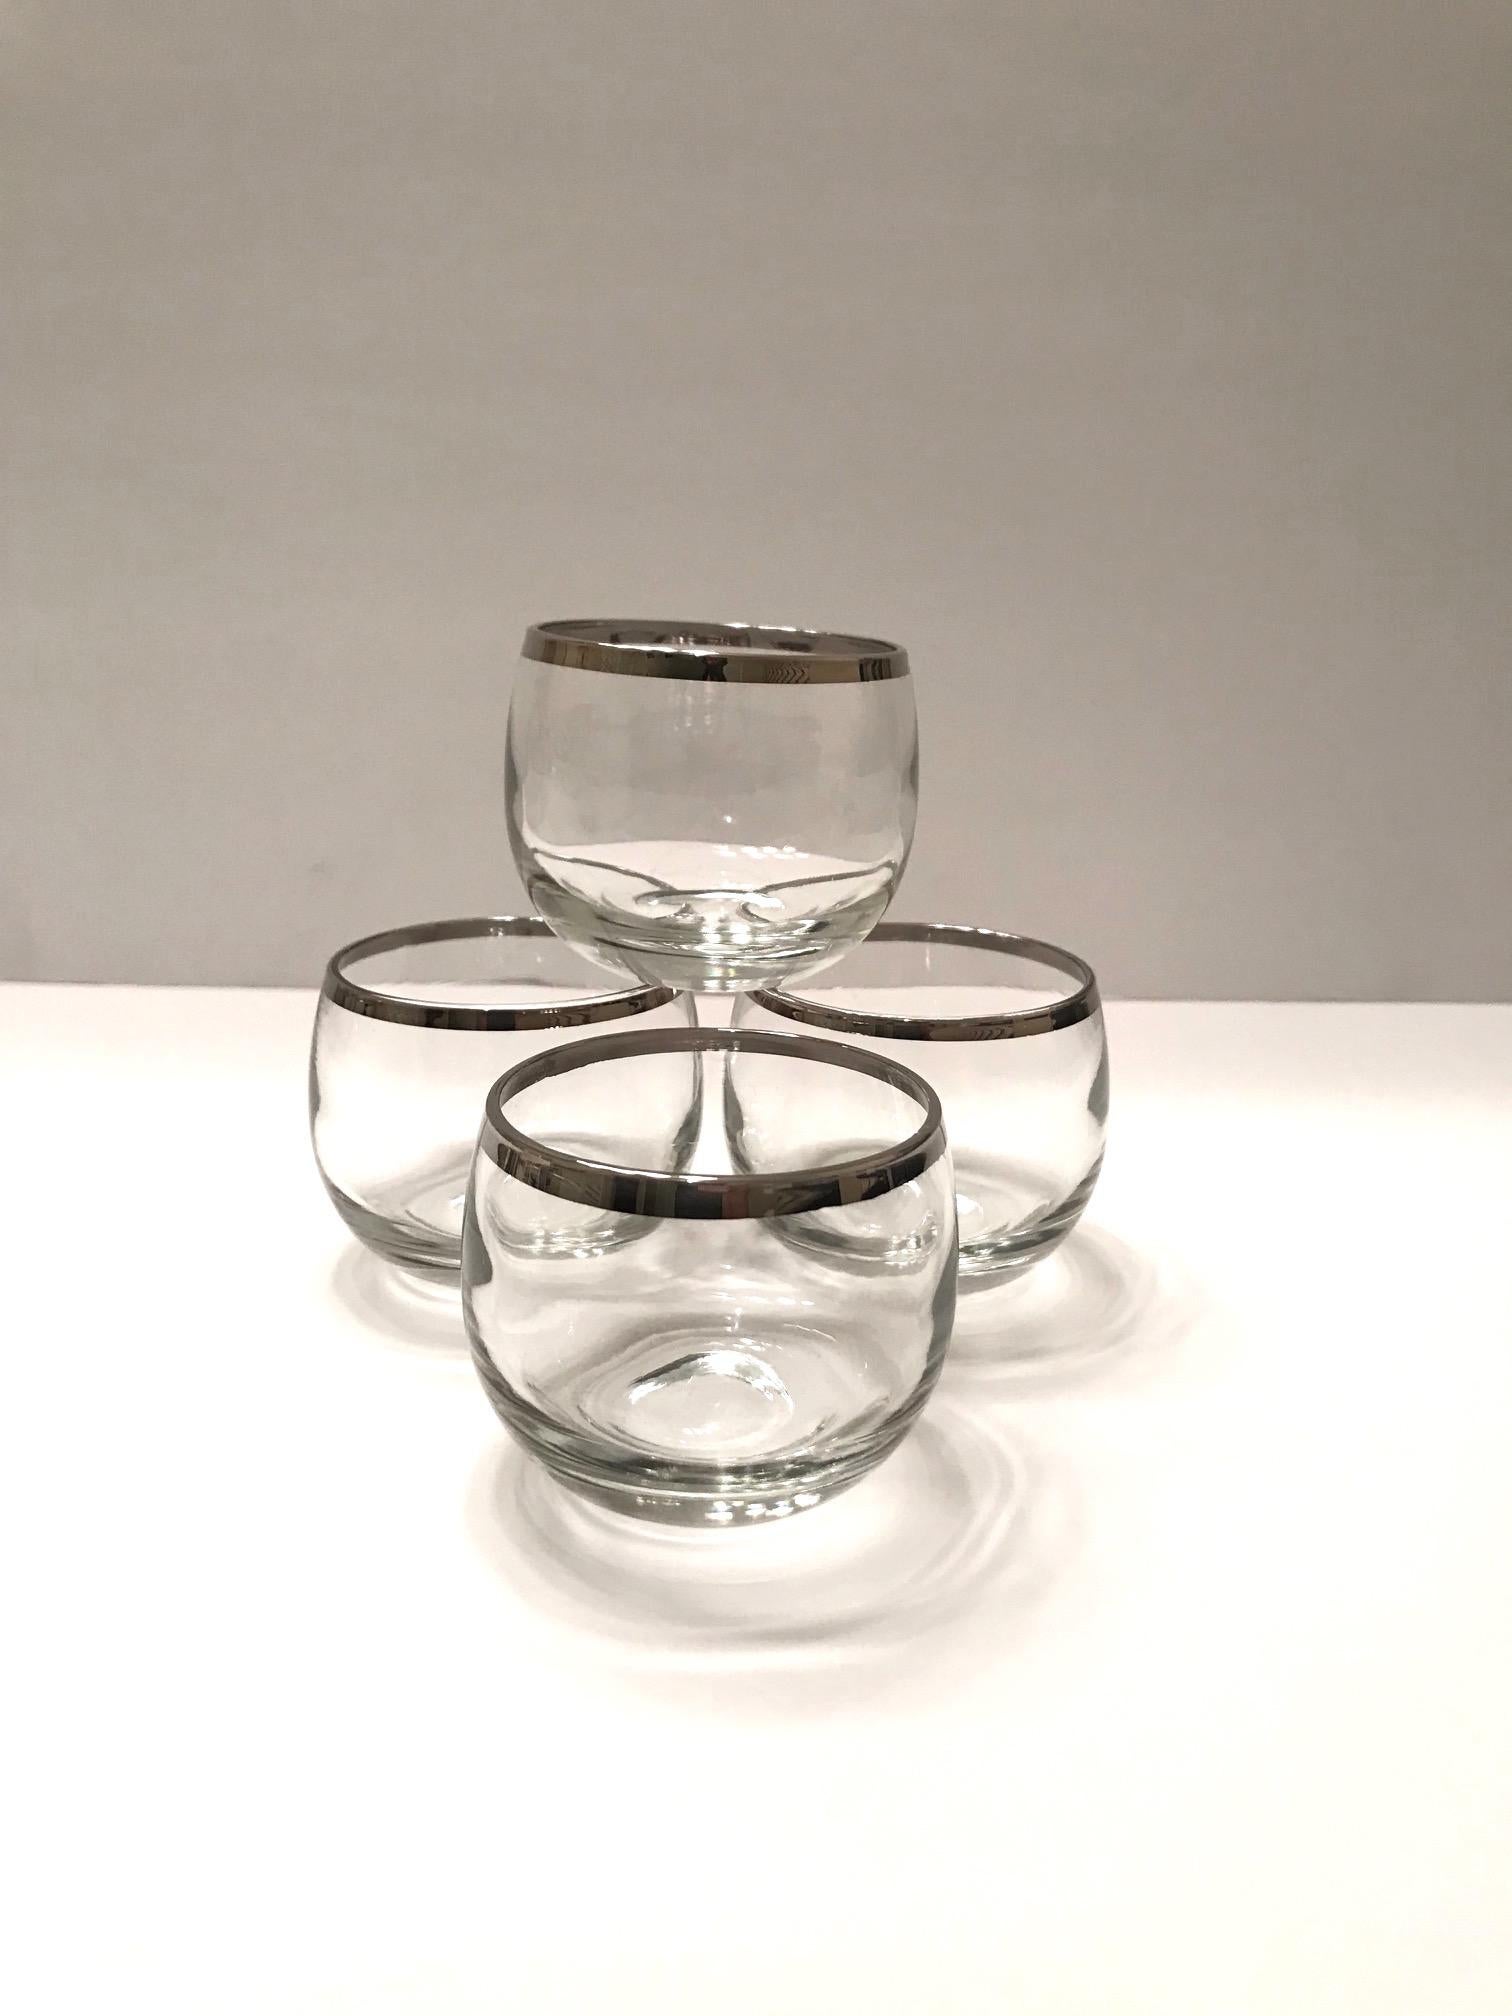 Midcentury Barware Glass Set with Sterling Silver Overlay by Dorothy Thorpe 2